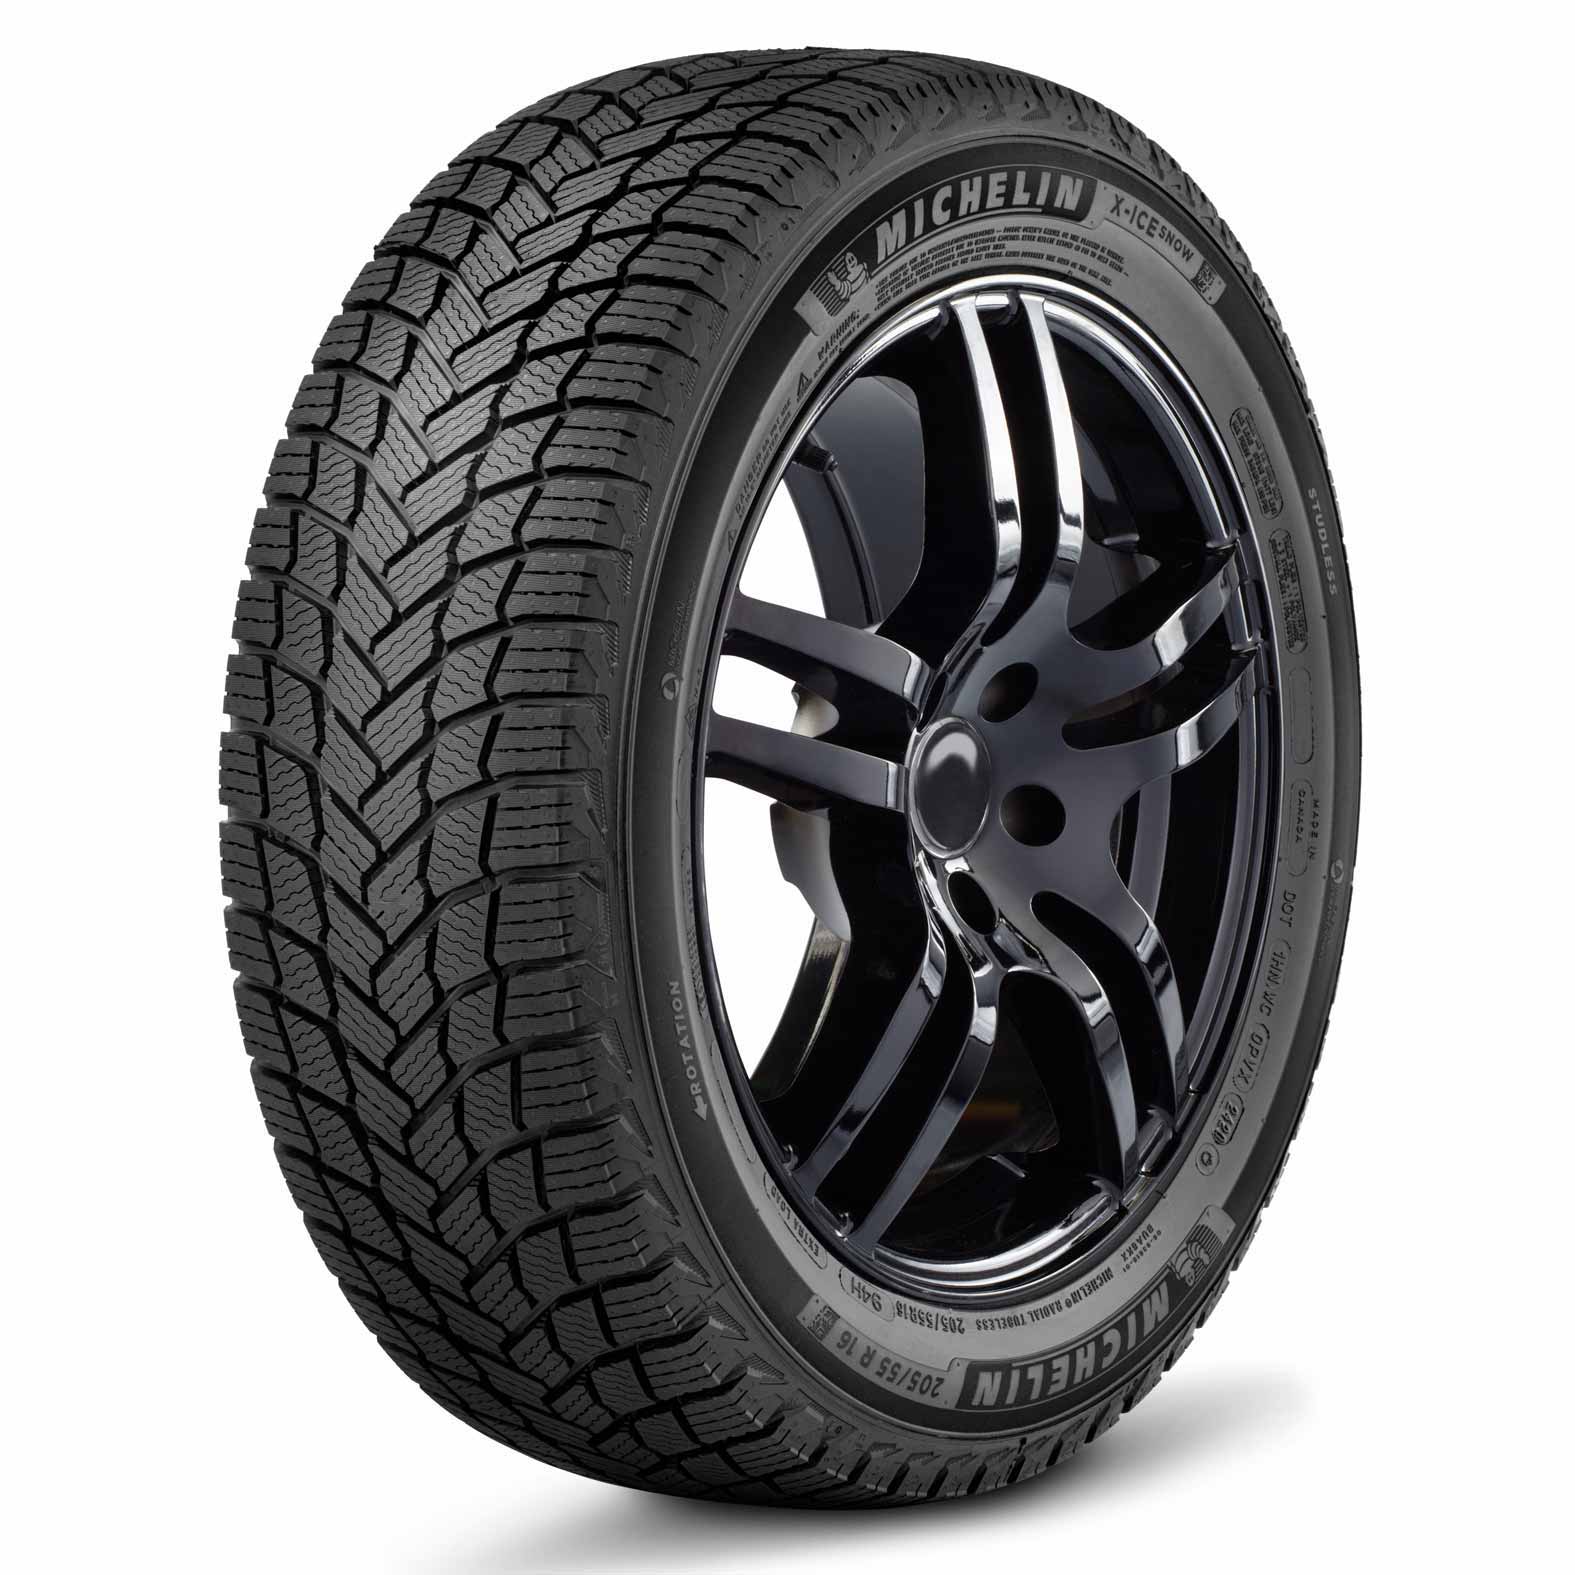 Michelin X-Ice Snow Tire for Winter | Kal Tire